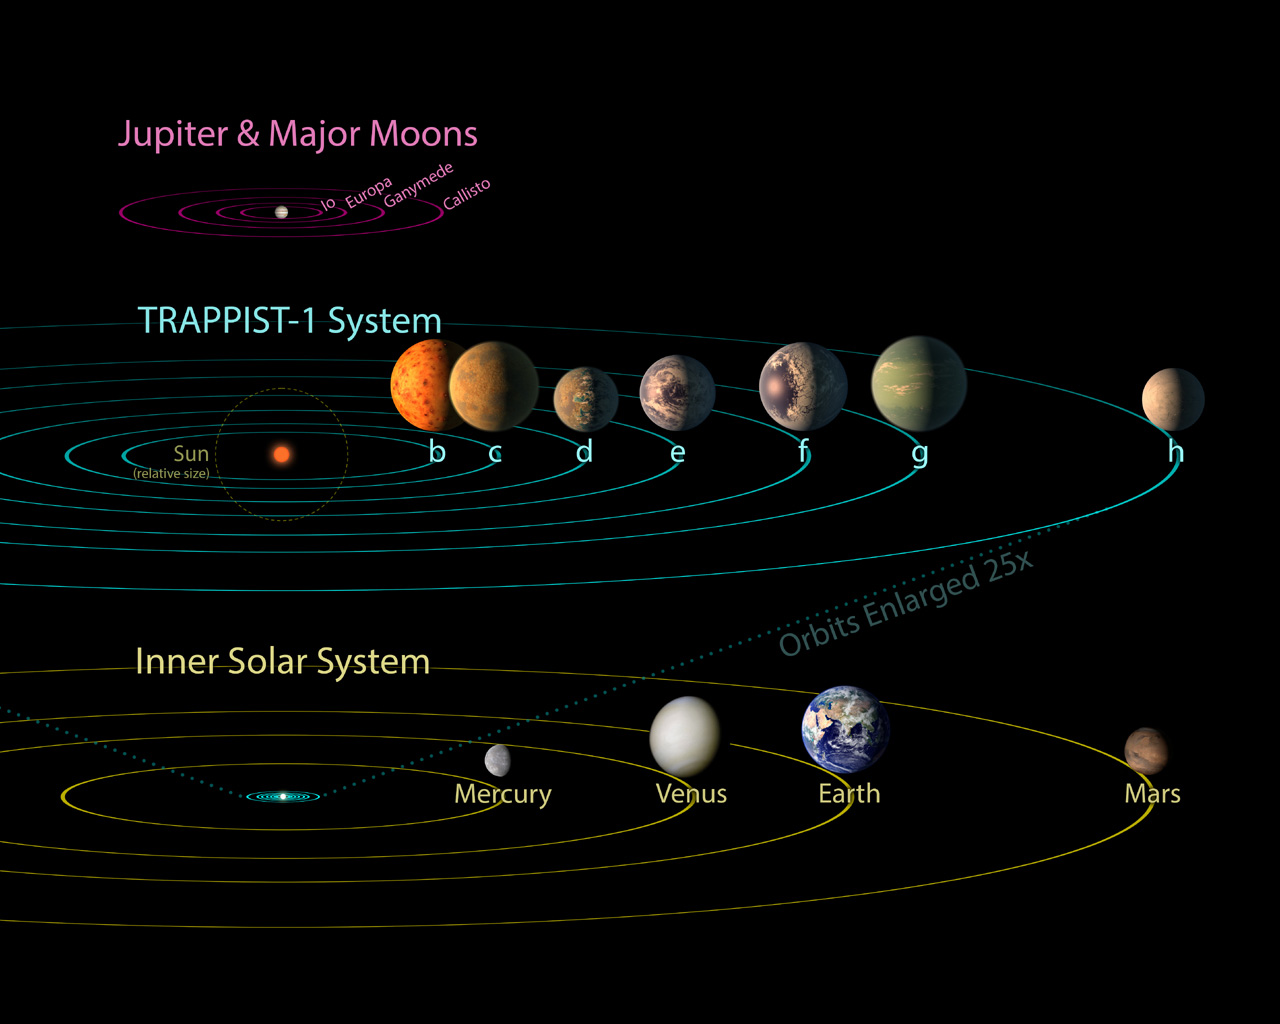 Space Image Trappist Parison To Solar System And Jovian Moons